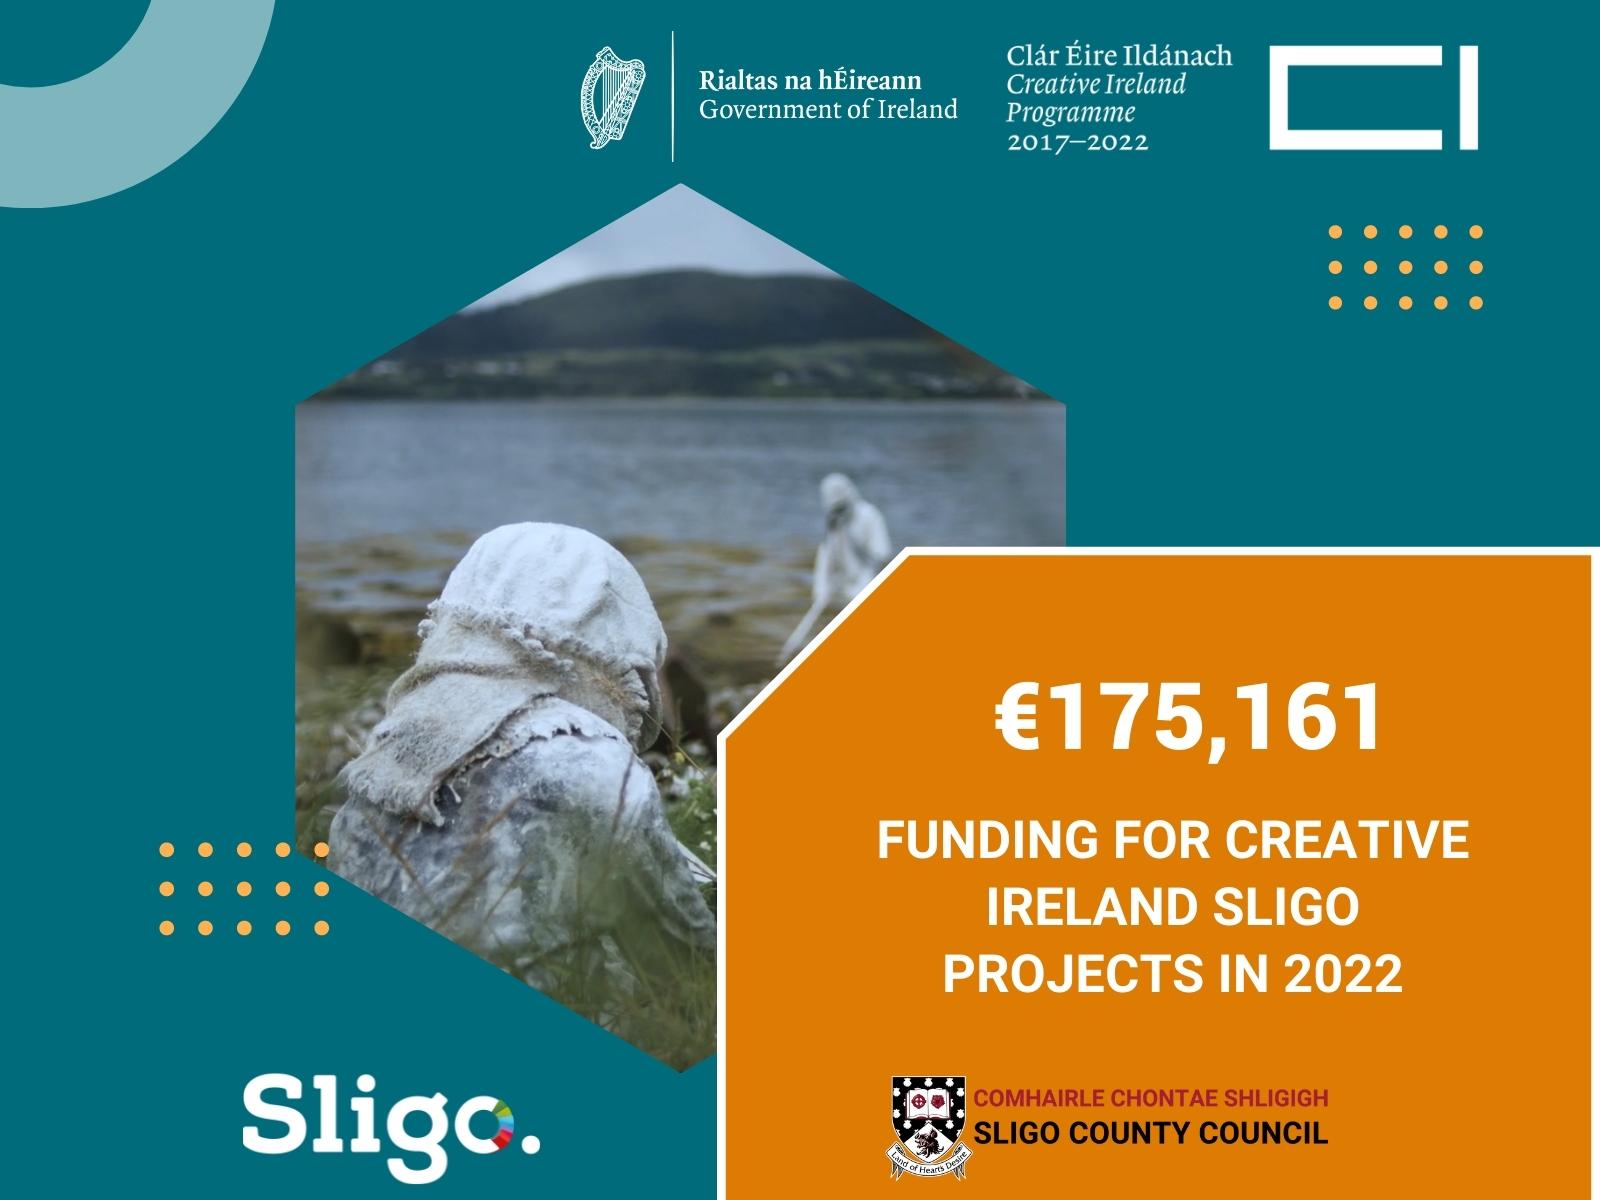 Ministers announce €175,161 of funding in 2022 for Creative Ireland local authority projects in Sligo